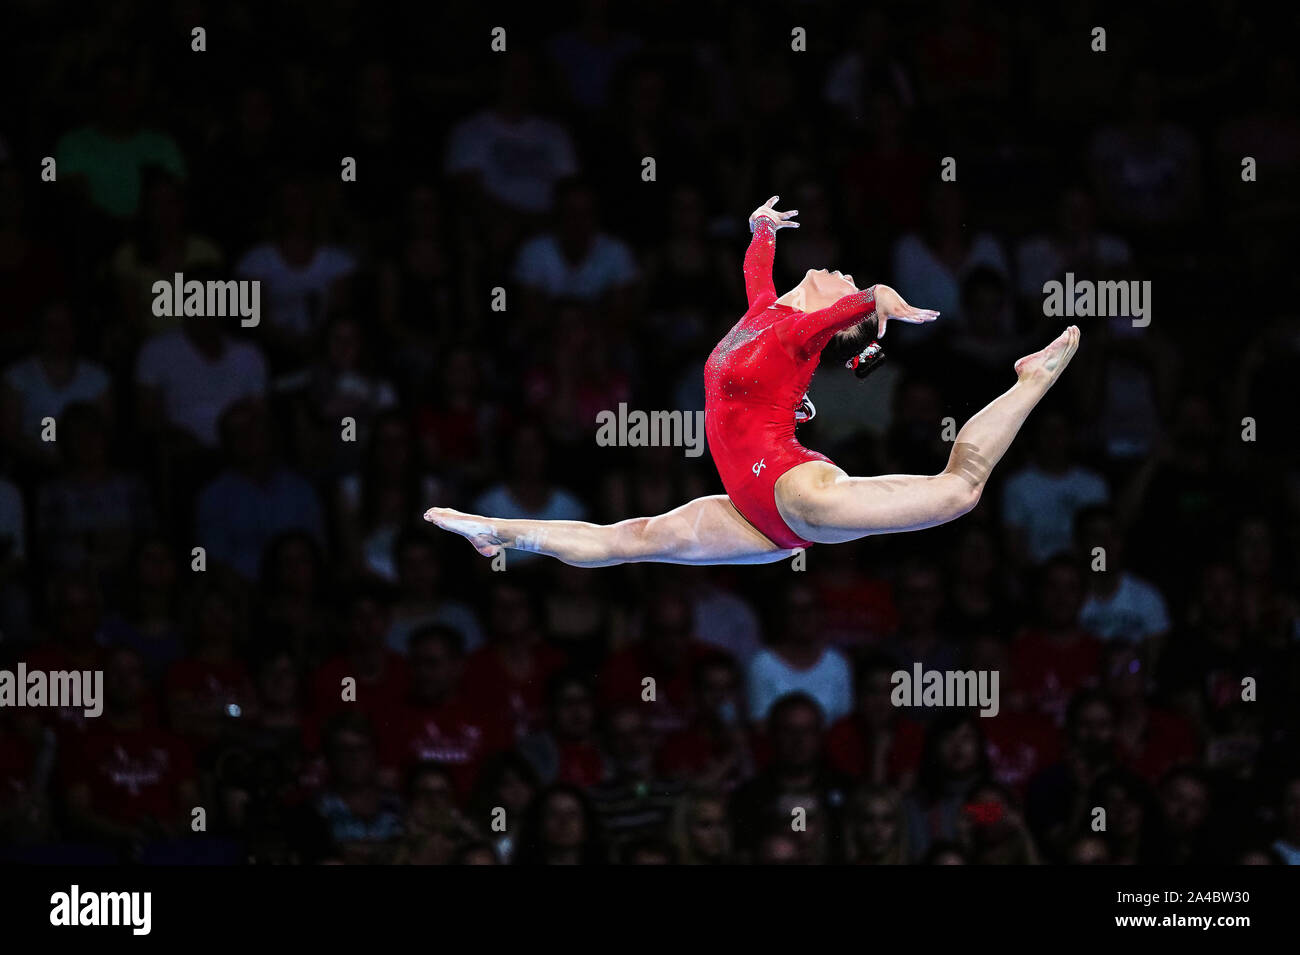 Stuttgart, Germany. 13th Oct, 2019. Kara Eaker of United States of America competing in balance beam for women during the 49th FIG Artistic Gymnastics World Championships at the Hanns Martin Schleyer Halle in Stuttgart, Germany. Ulrik Pedersen/CSM/Alamy Live News Stock Photo